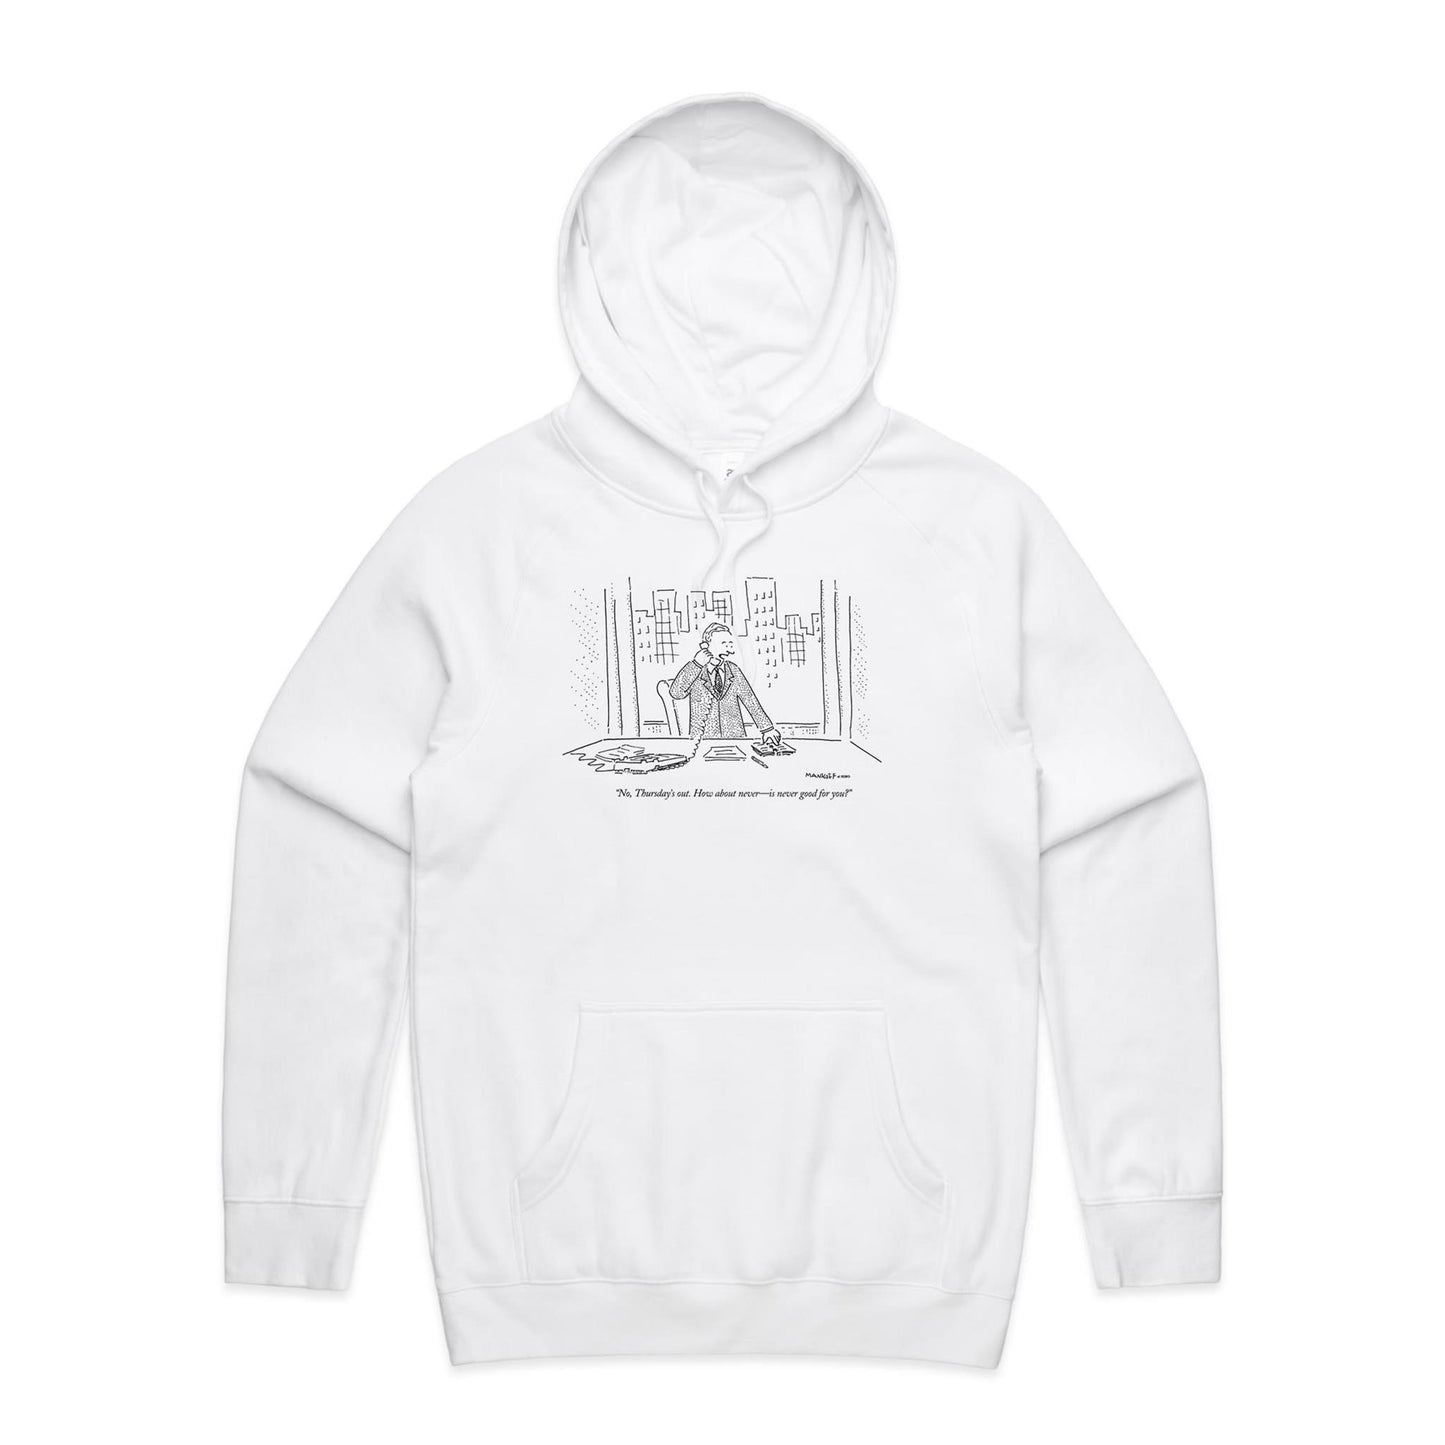 How About Never Hoodies for Men (Unisex)